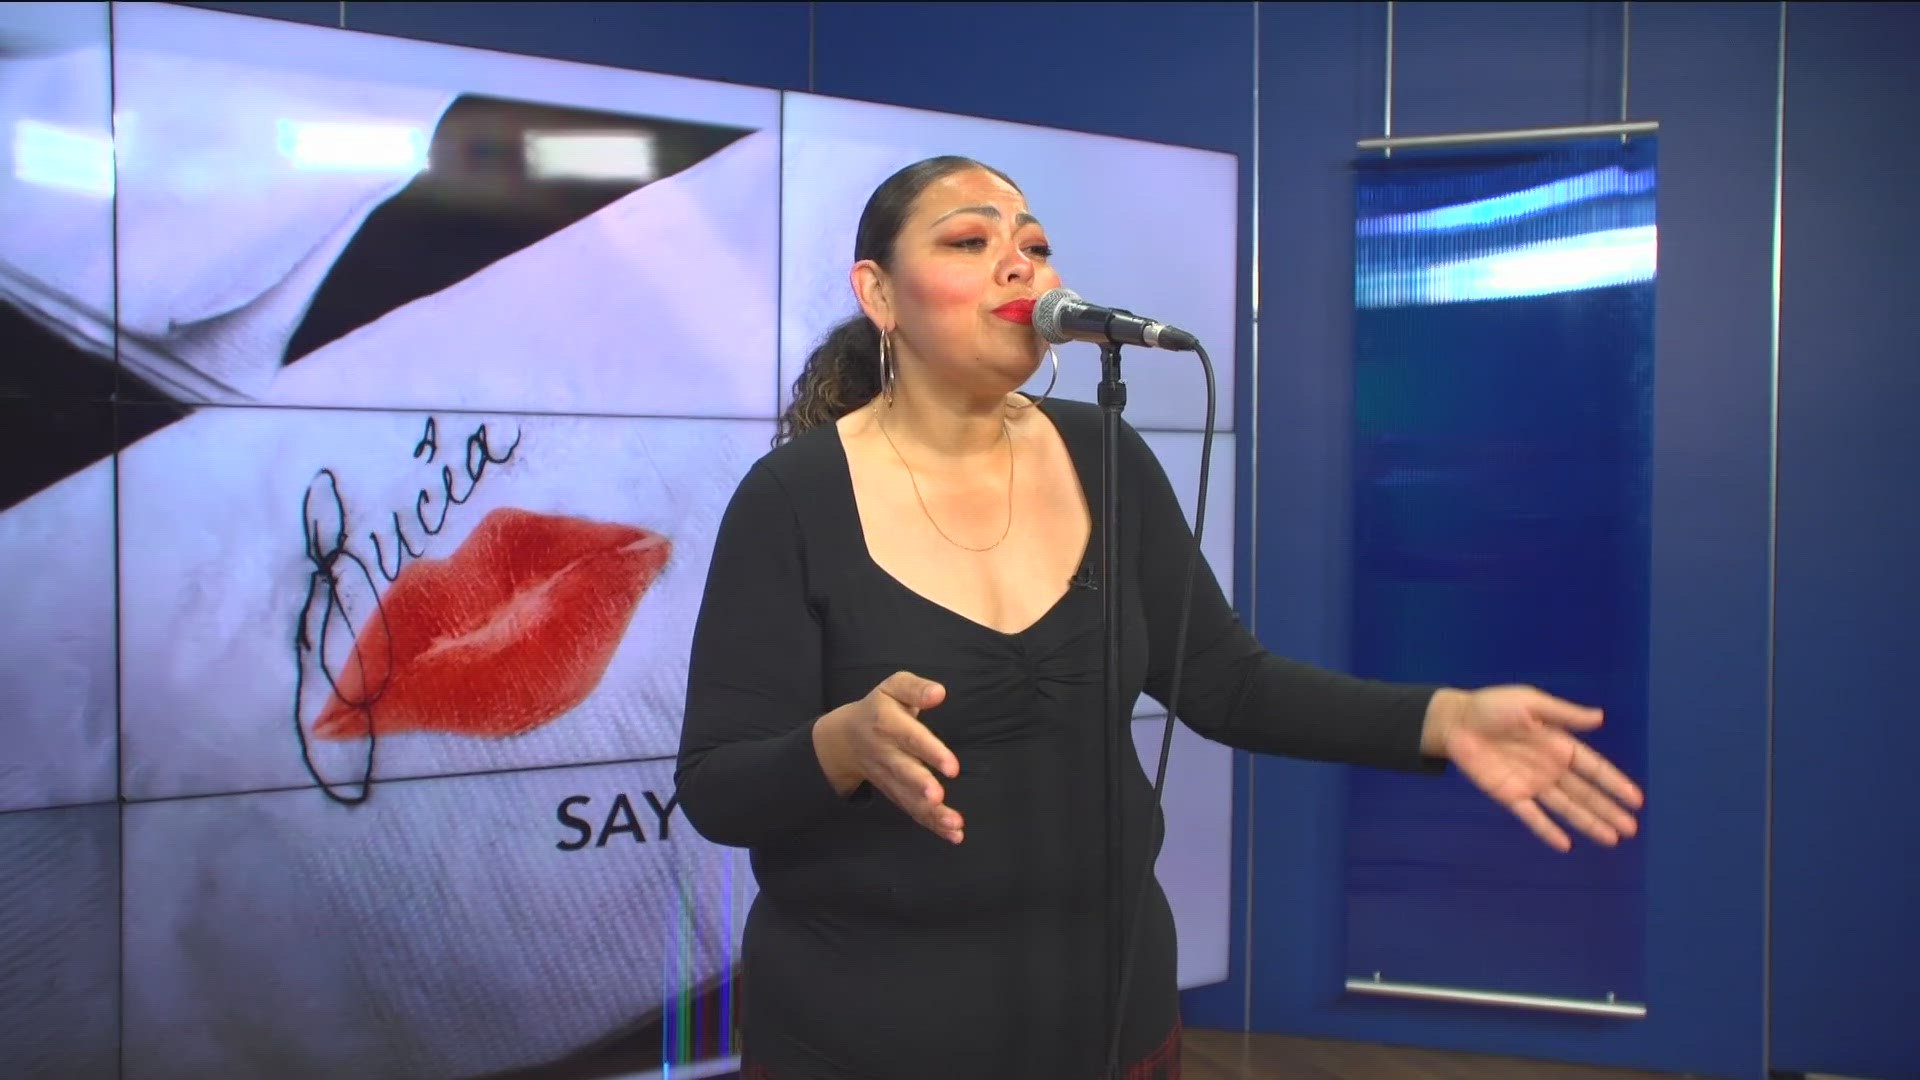 Singer/songwriter LUCIA came to the CBS 8 studio to play her new single and talk about how she got started.